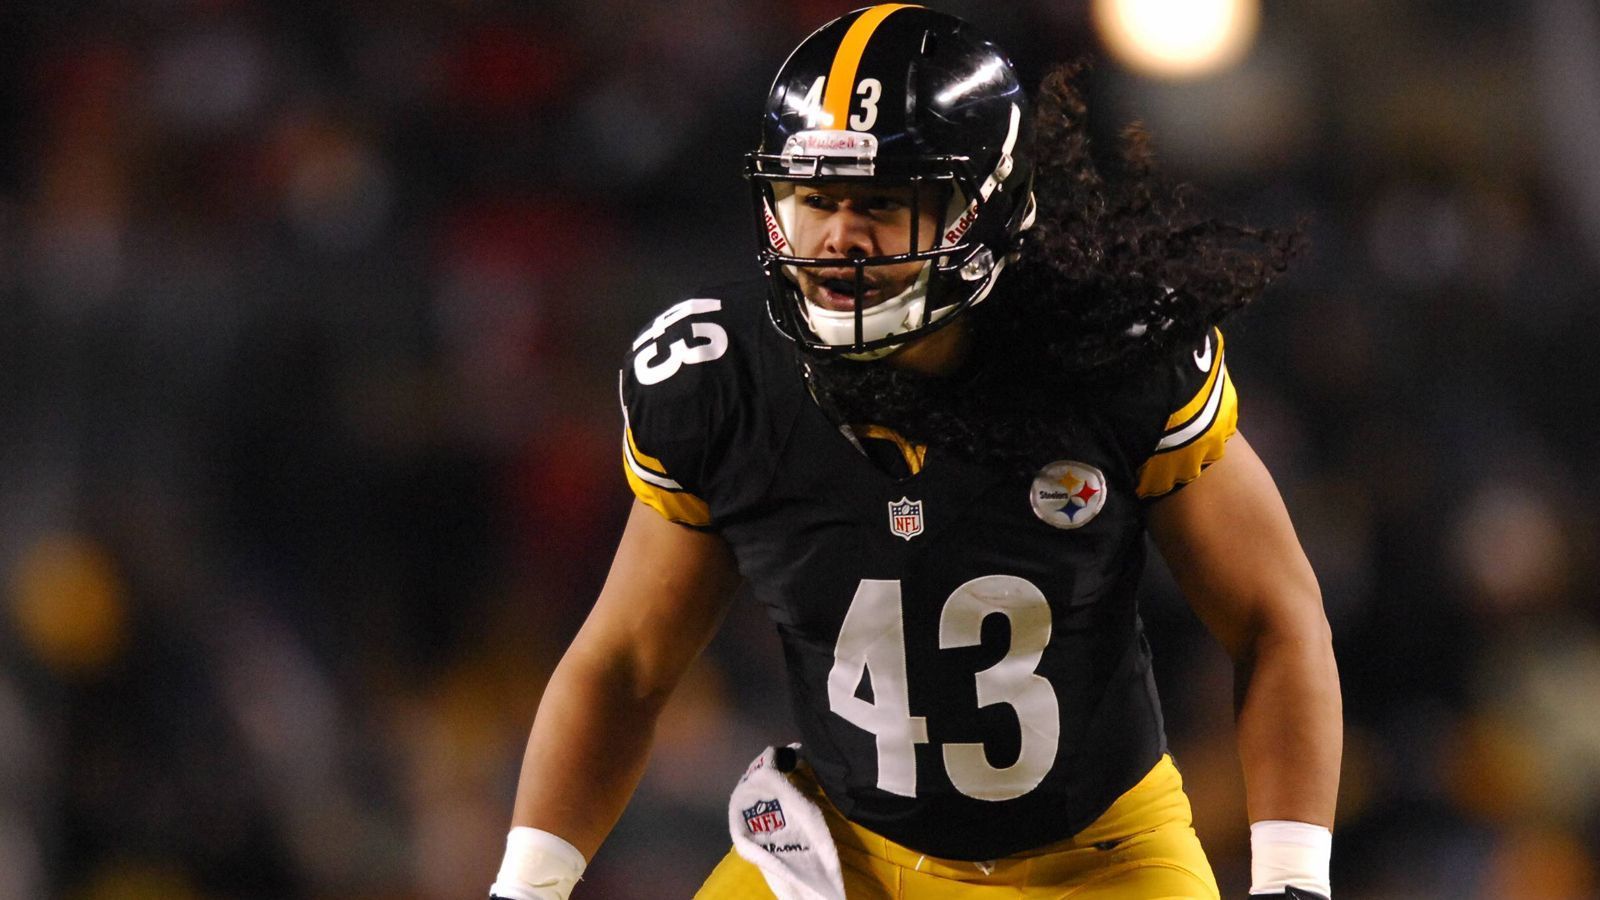 
                <strong>Hall of Fame Class</strong><br>
                Troy Polamalu (Safety, im Bild), Edgerrin James (Running Back), Steve Awater (Safety), Steve Hutchinson (Guard), Isaac Bruce (Wide Receiver)
              